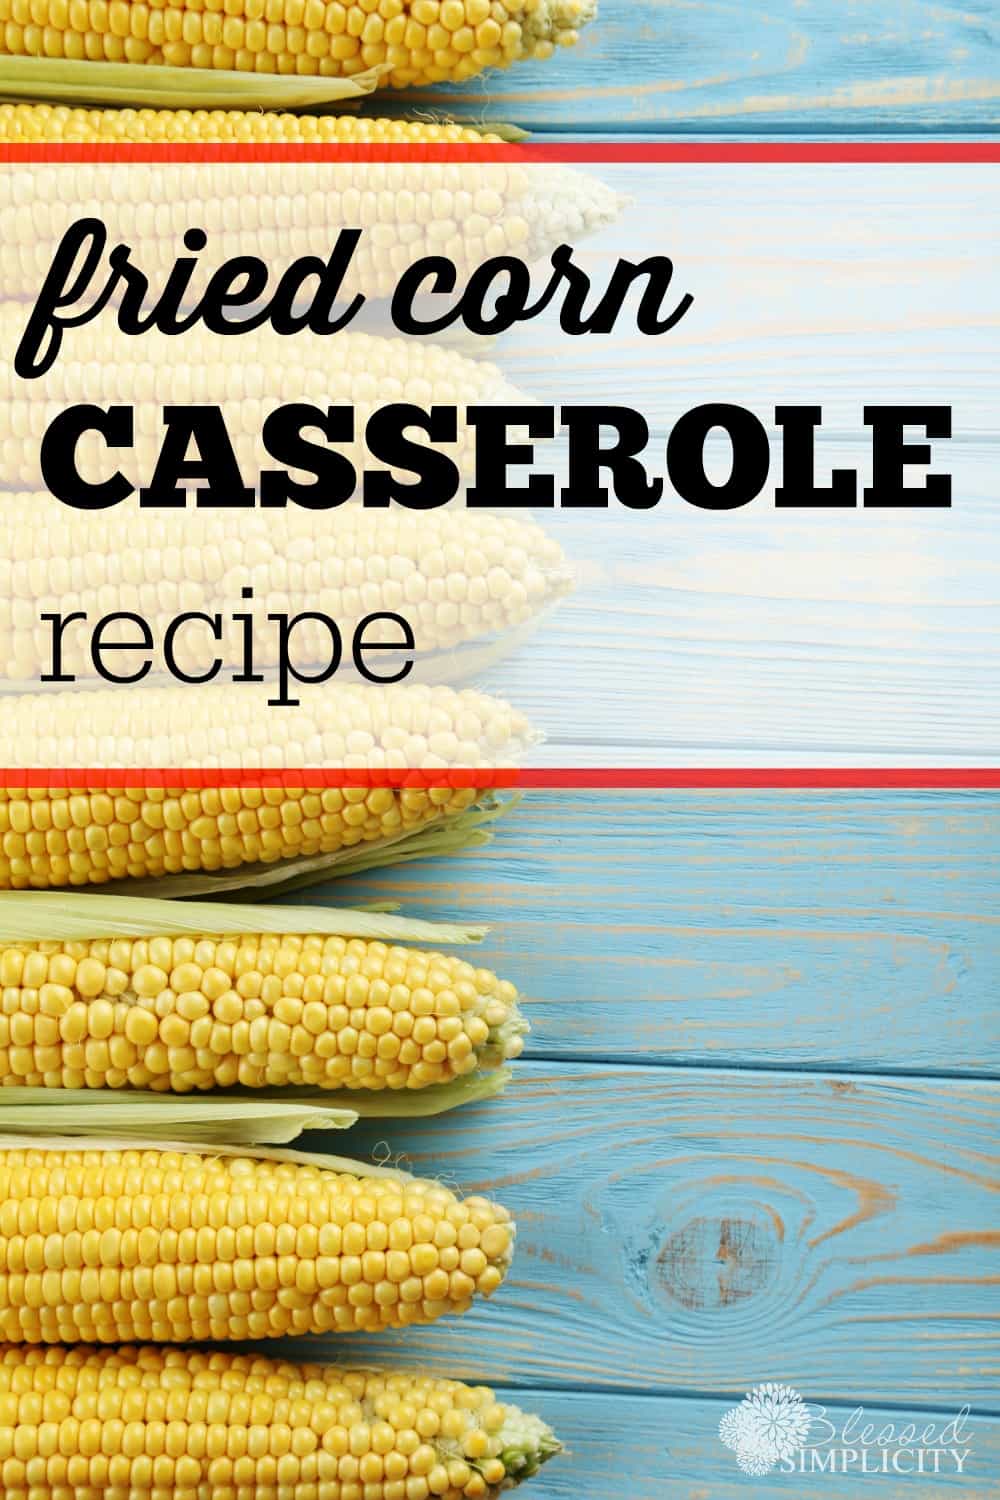 The perfect corn casserole for holidays like Thanksgiving and Christmas or any potluck dinner occasion.